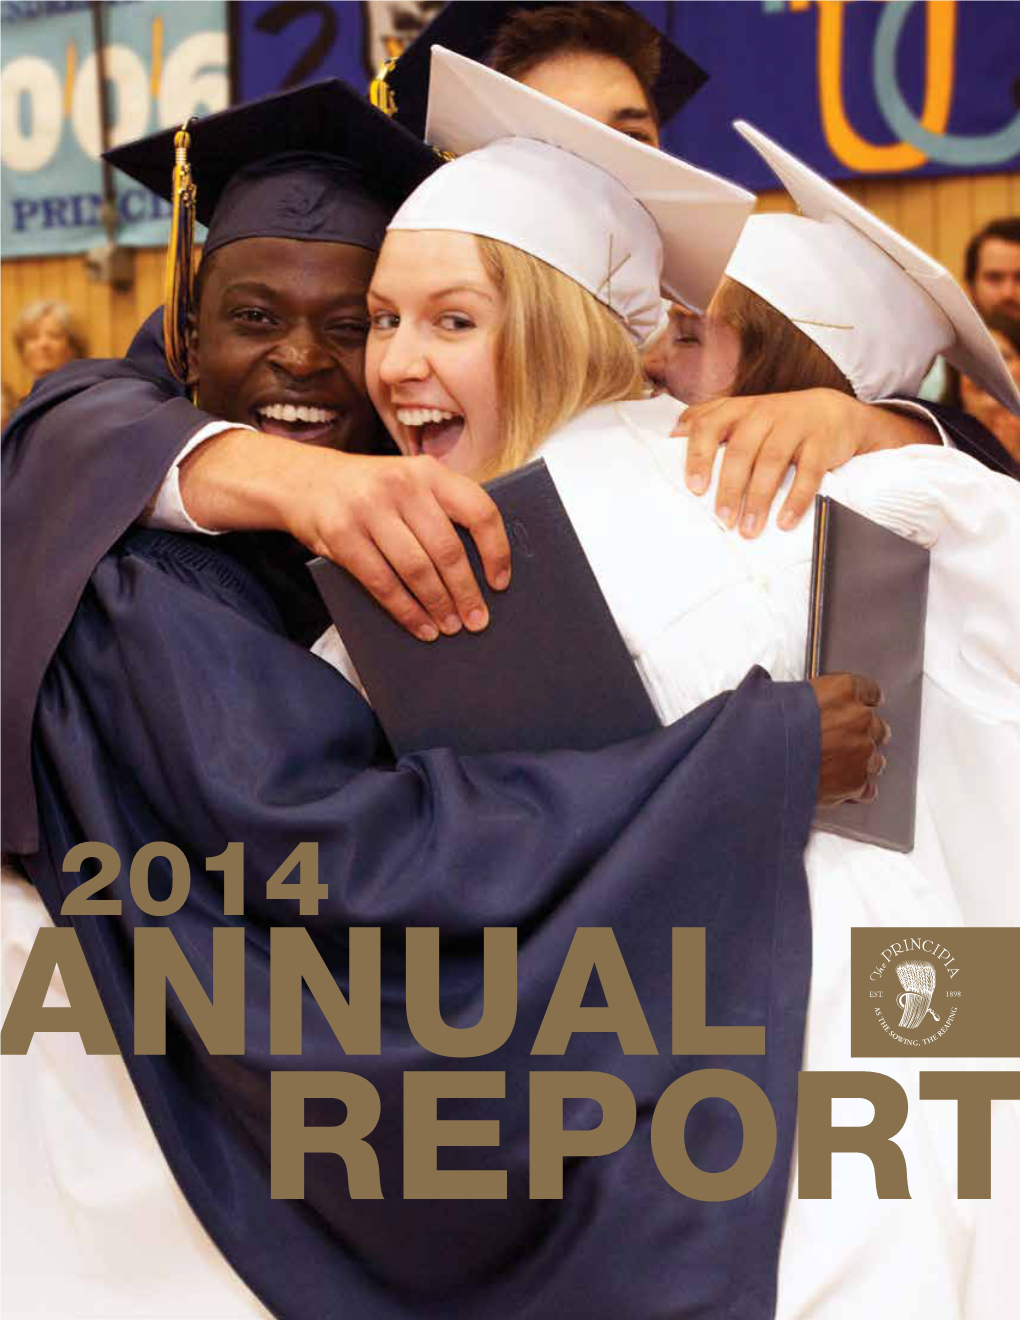 OF COLLEGE ALUMNI Contributed Financially to Principia, up % from 22 Percent Two Years Ago